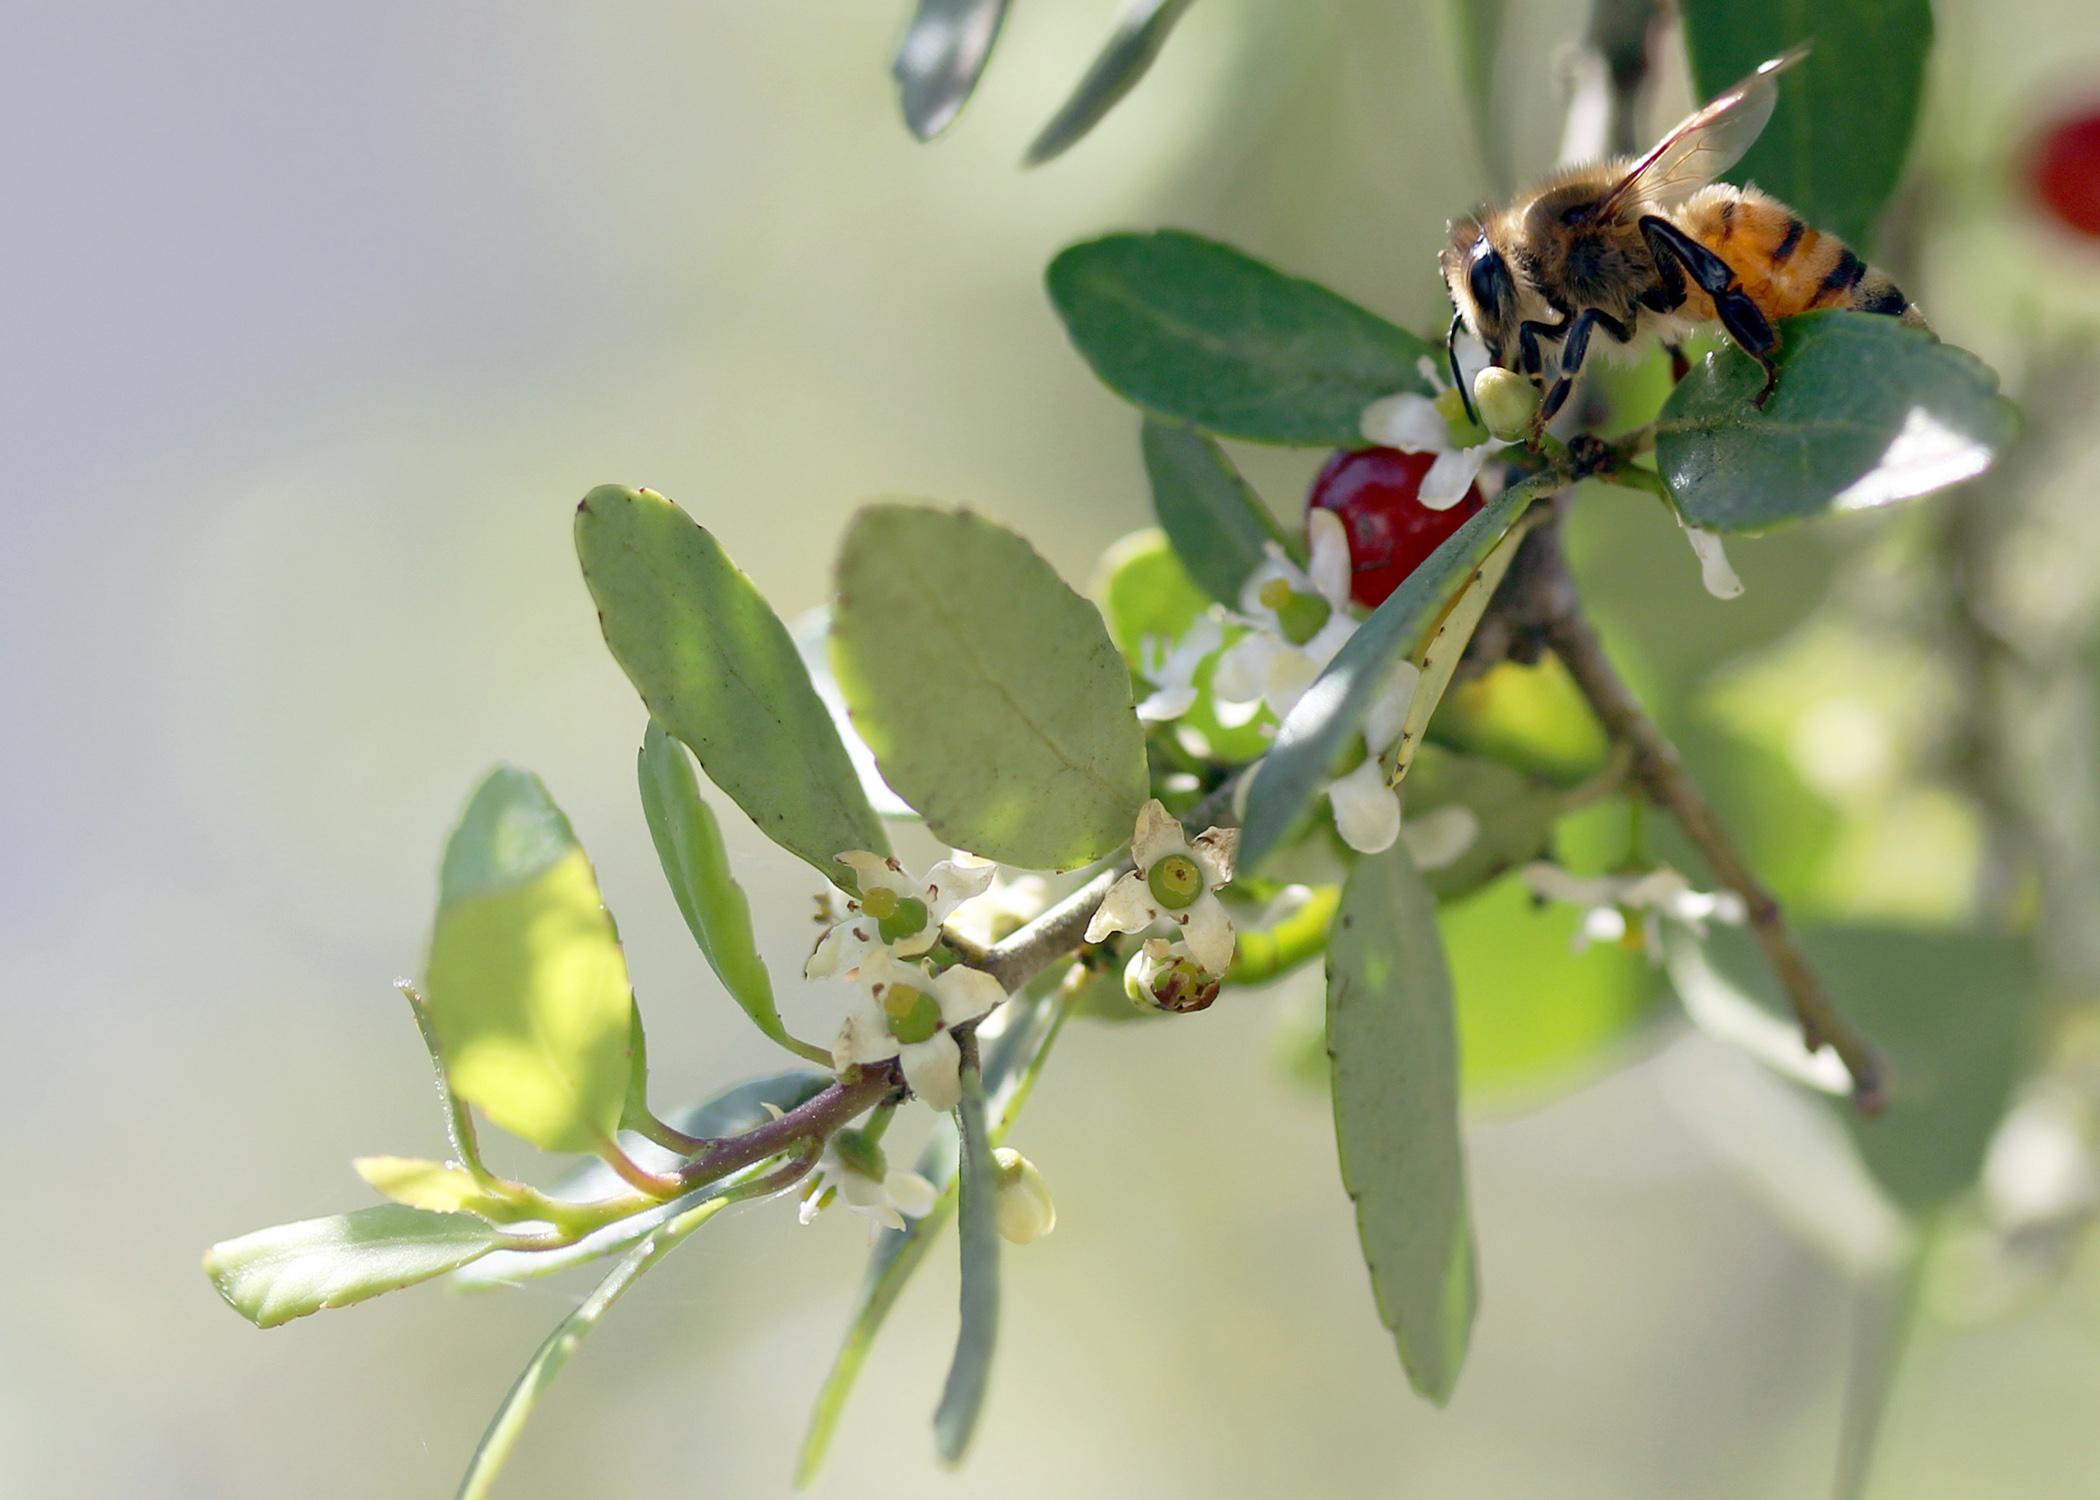 Flowering trees and shrubs, such as this weeping yaupon holly, provide nectar for bees, berries for birds, and shelter and nesting sites for a variety of other animals. (Photo courtesy of Marina Denny)